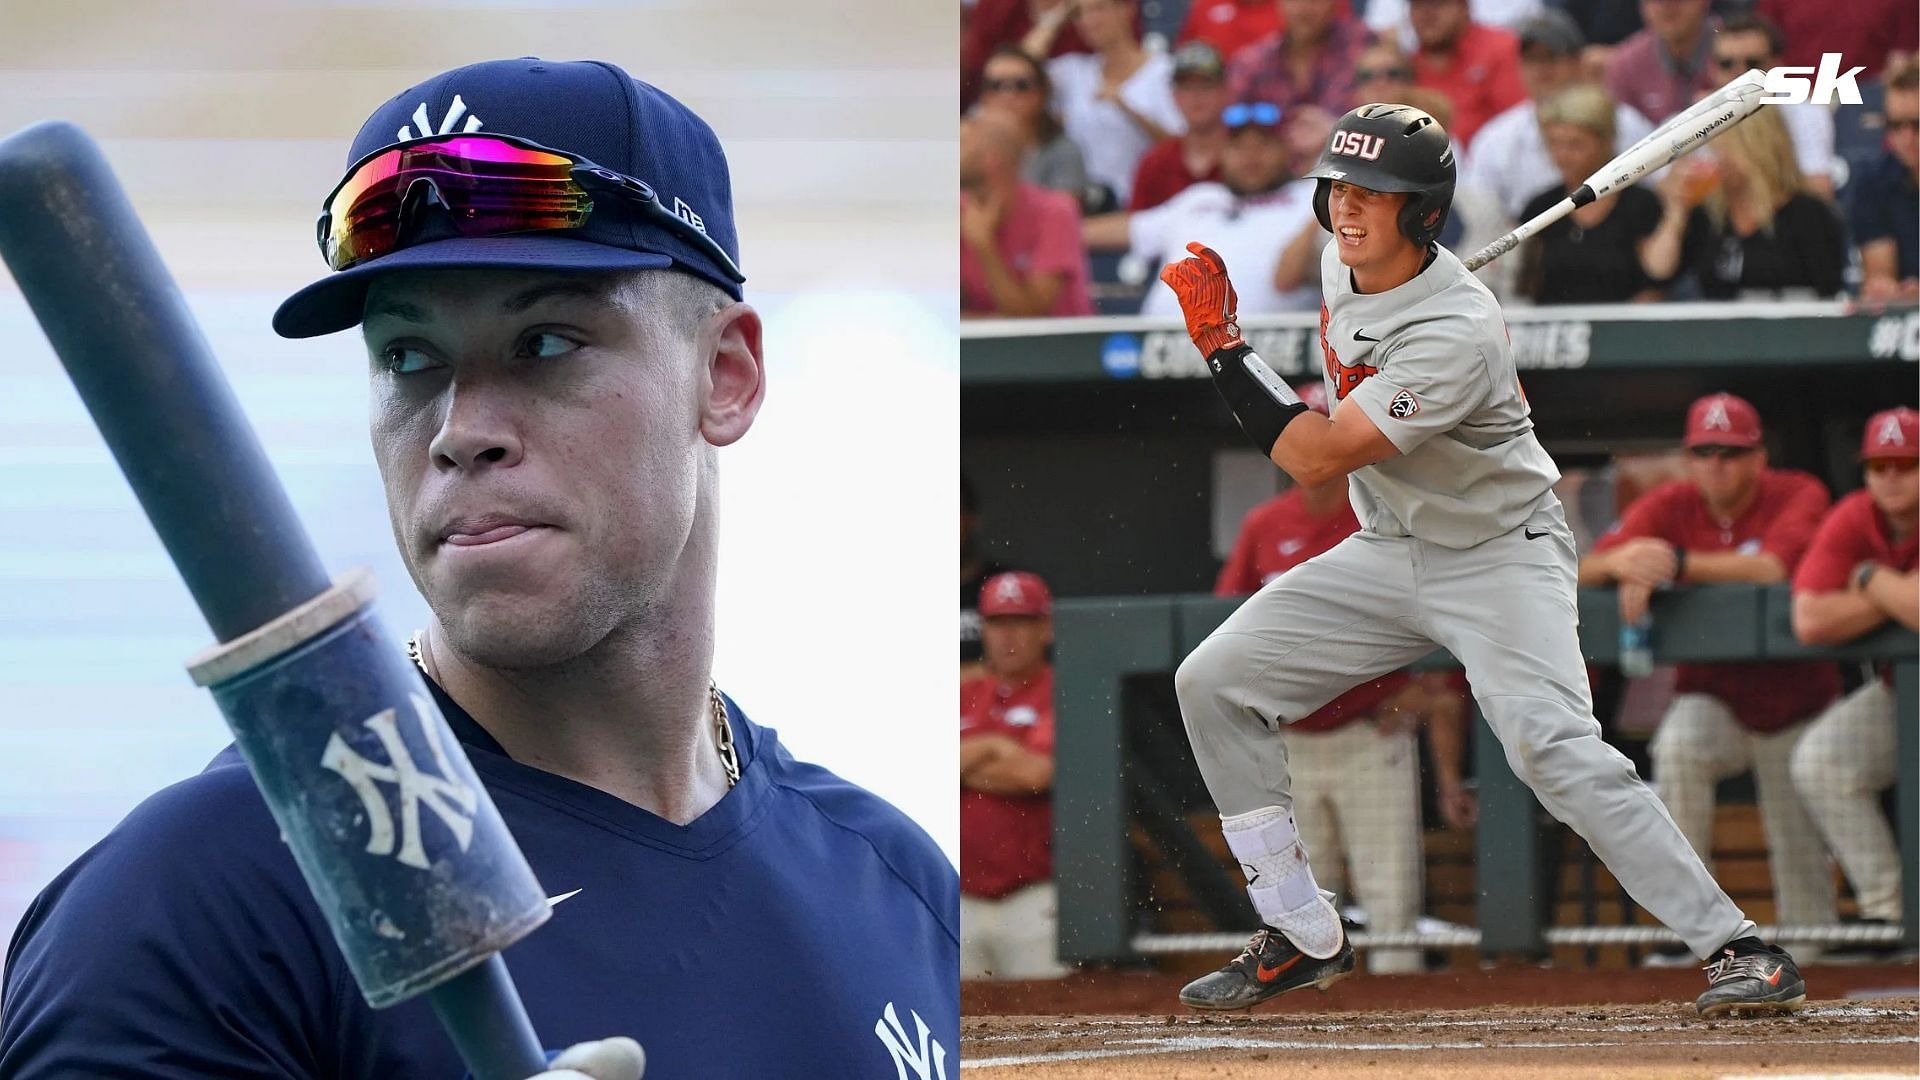 10 college baseball players who rose to MLB stardom ft. Aaron Judge